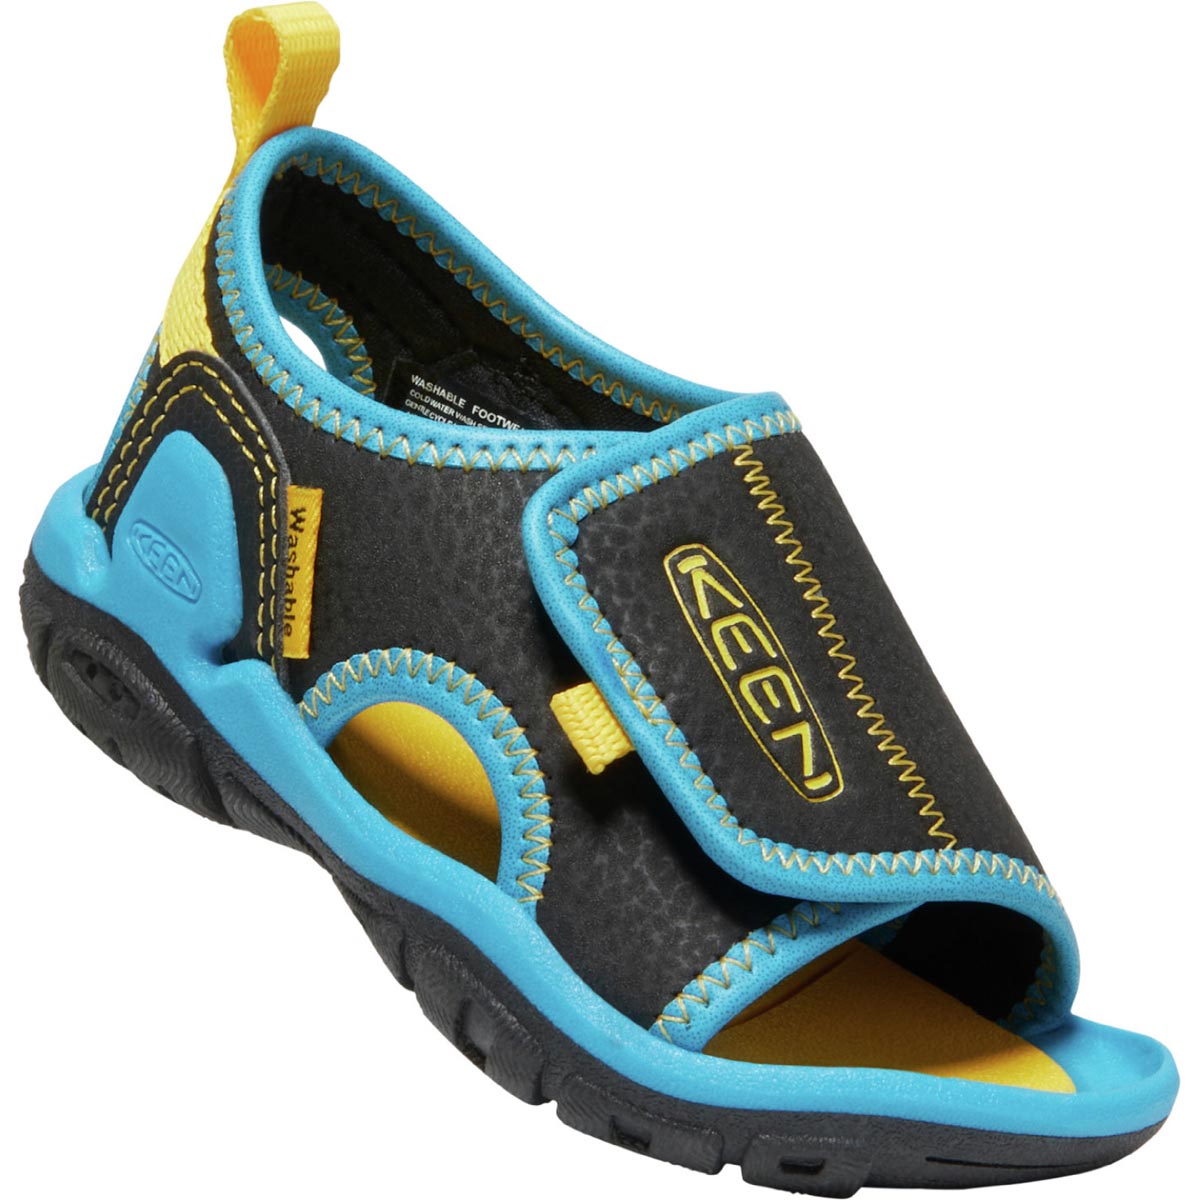 KEEN Toddlers' Knotch River OT Sizes 4-7